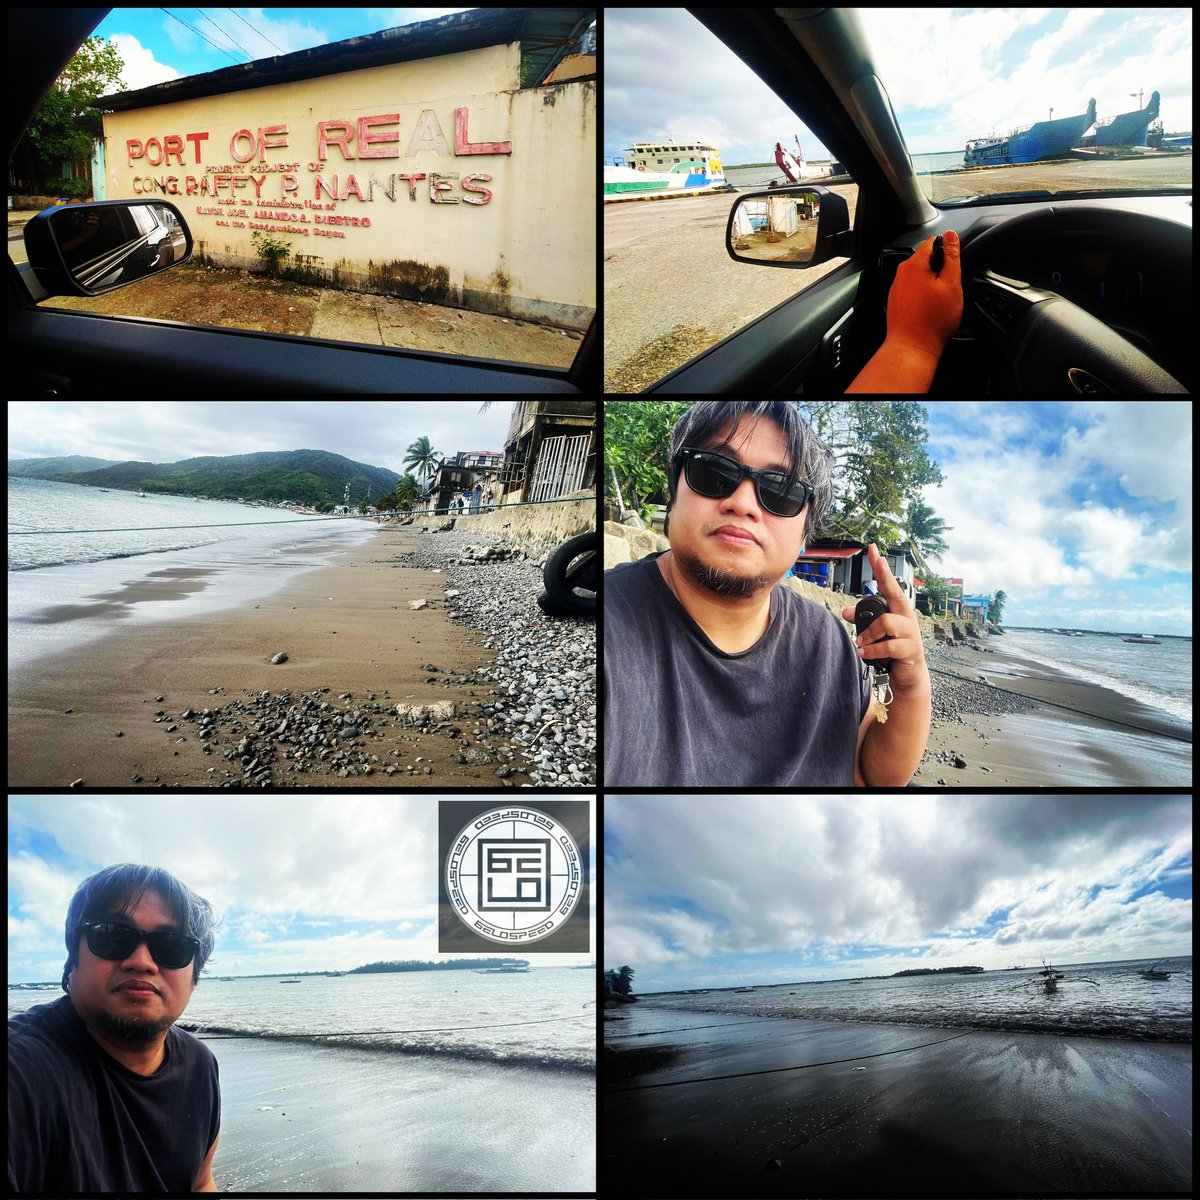 [DEC.25.2023] ITS XMAS DAY...MERRY CHRISTMAS TO ALL...EARLY MORNING CHILL'N @ THE BEACH SIDE OF REAL QUEZON...
#gelospeed 
#merrychristmas2023
#realquezon